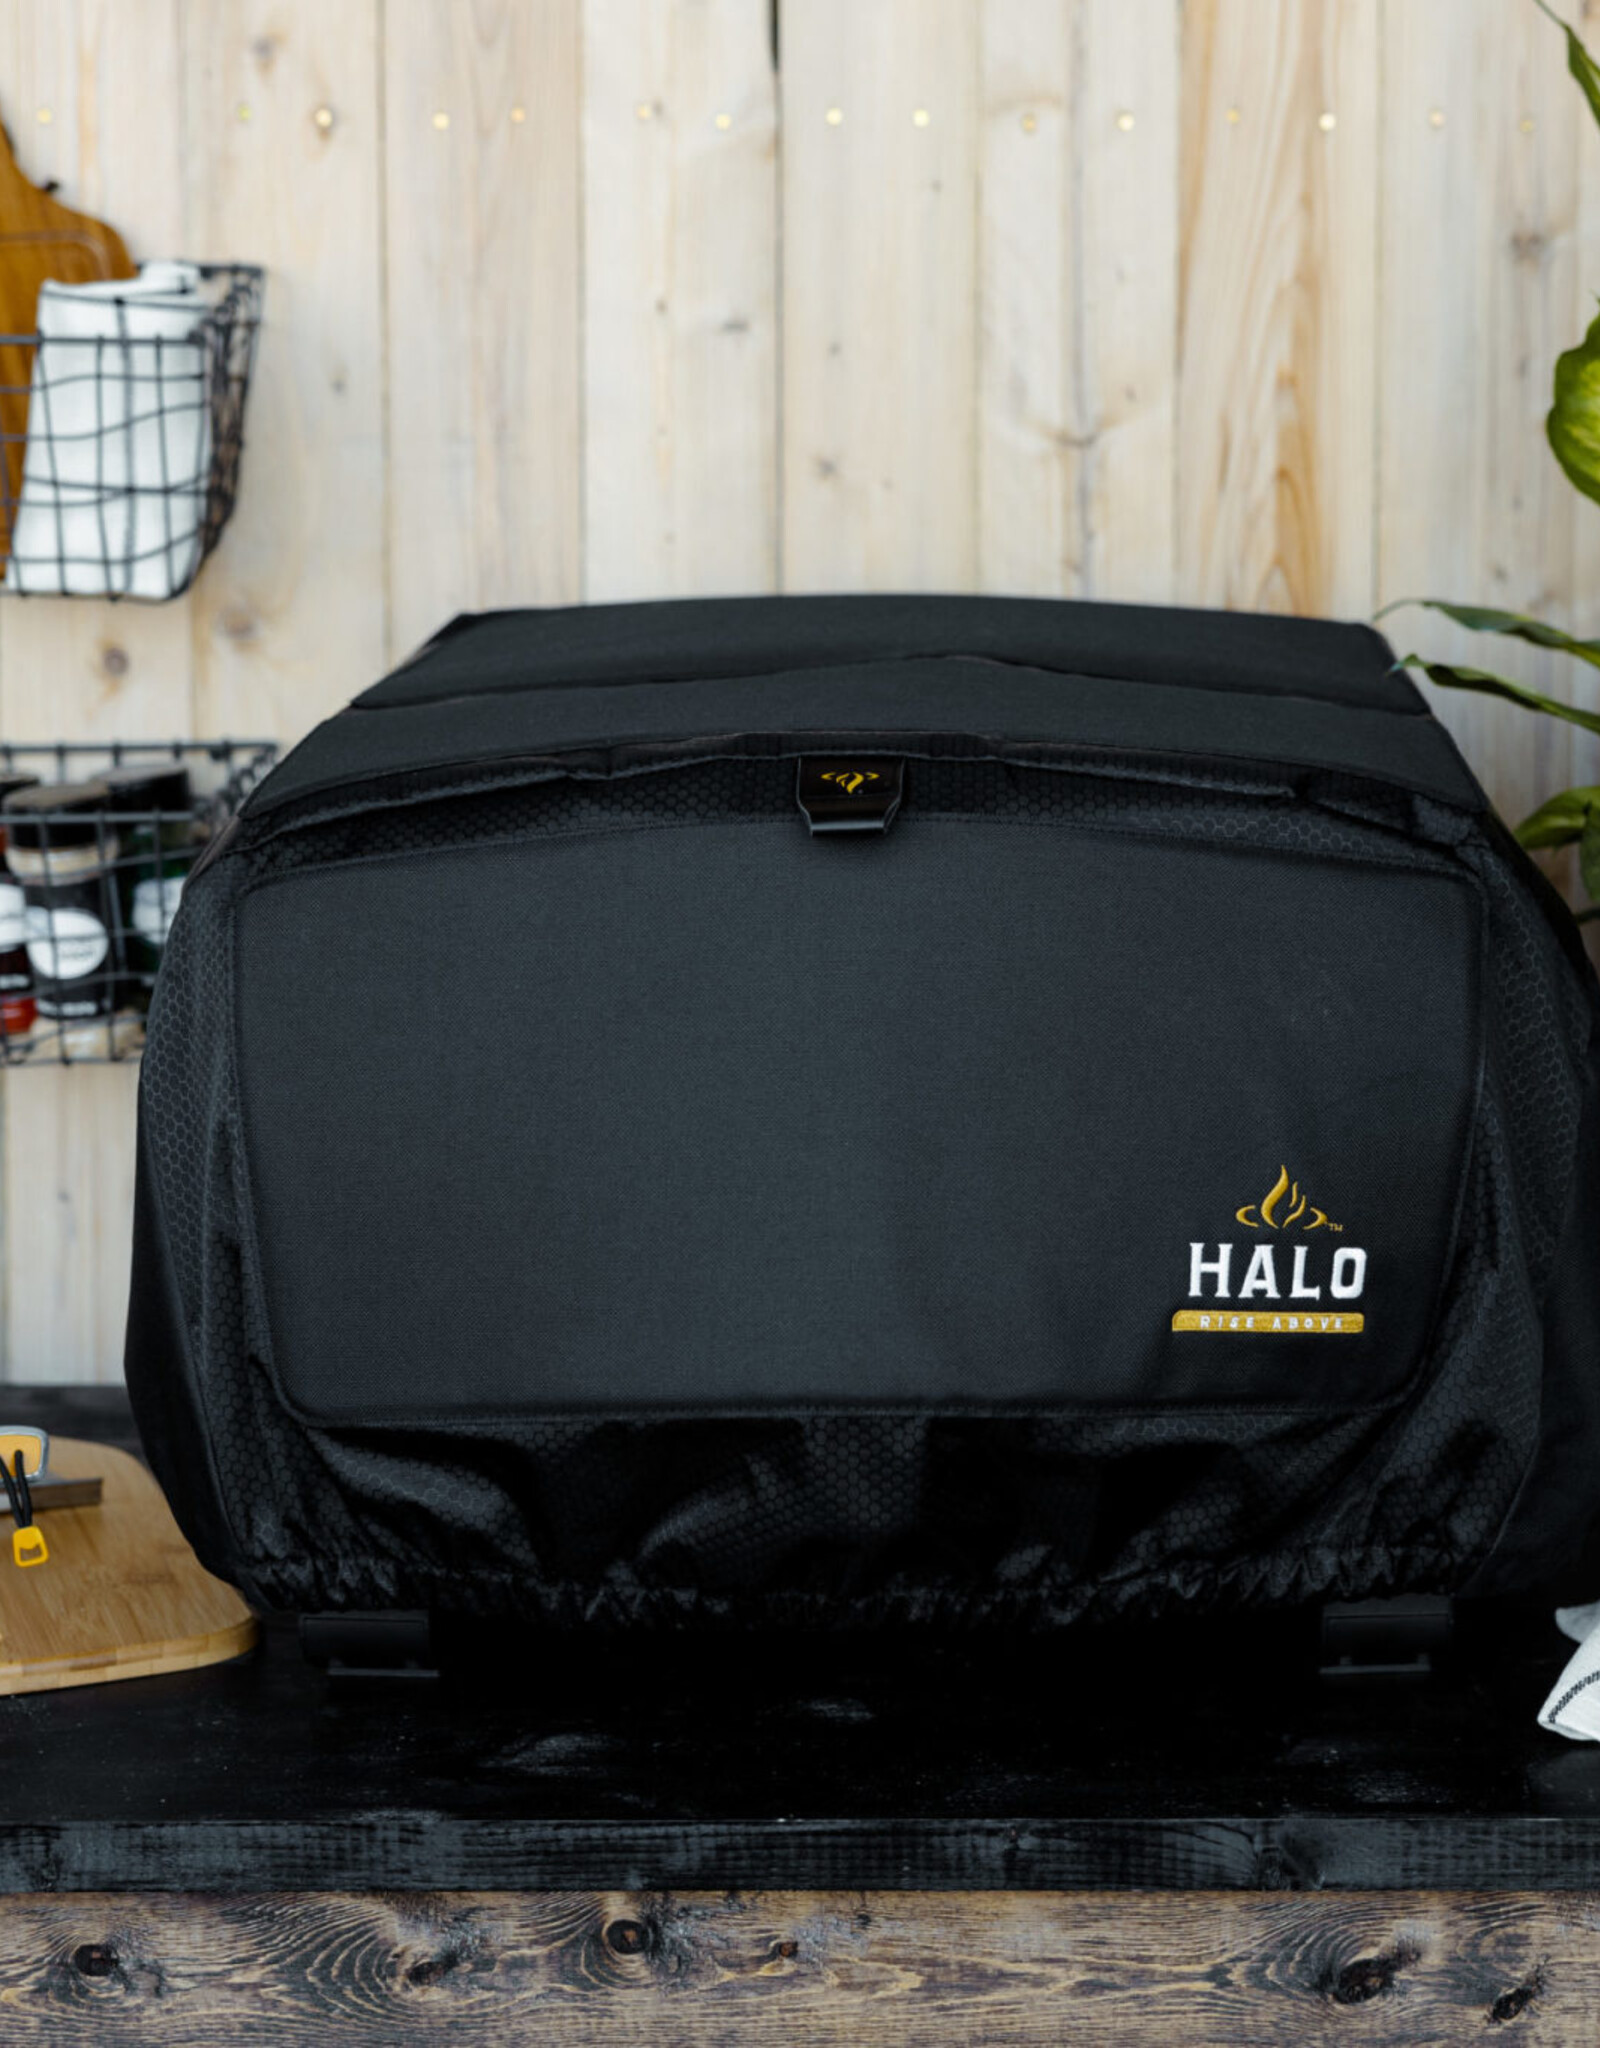 Halo Products Group Halo Versa 16 Cover - HZ-5004